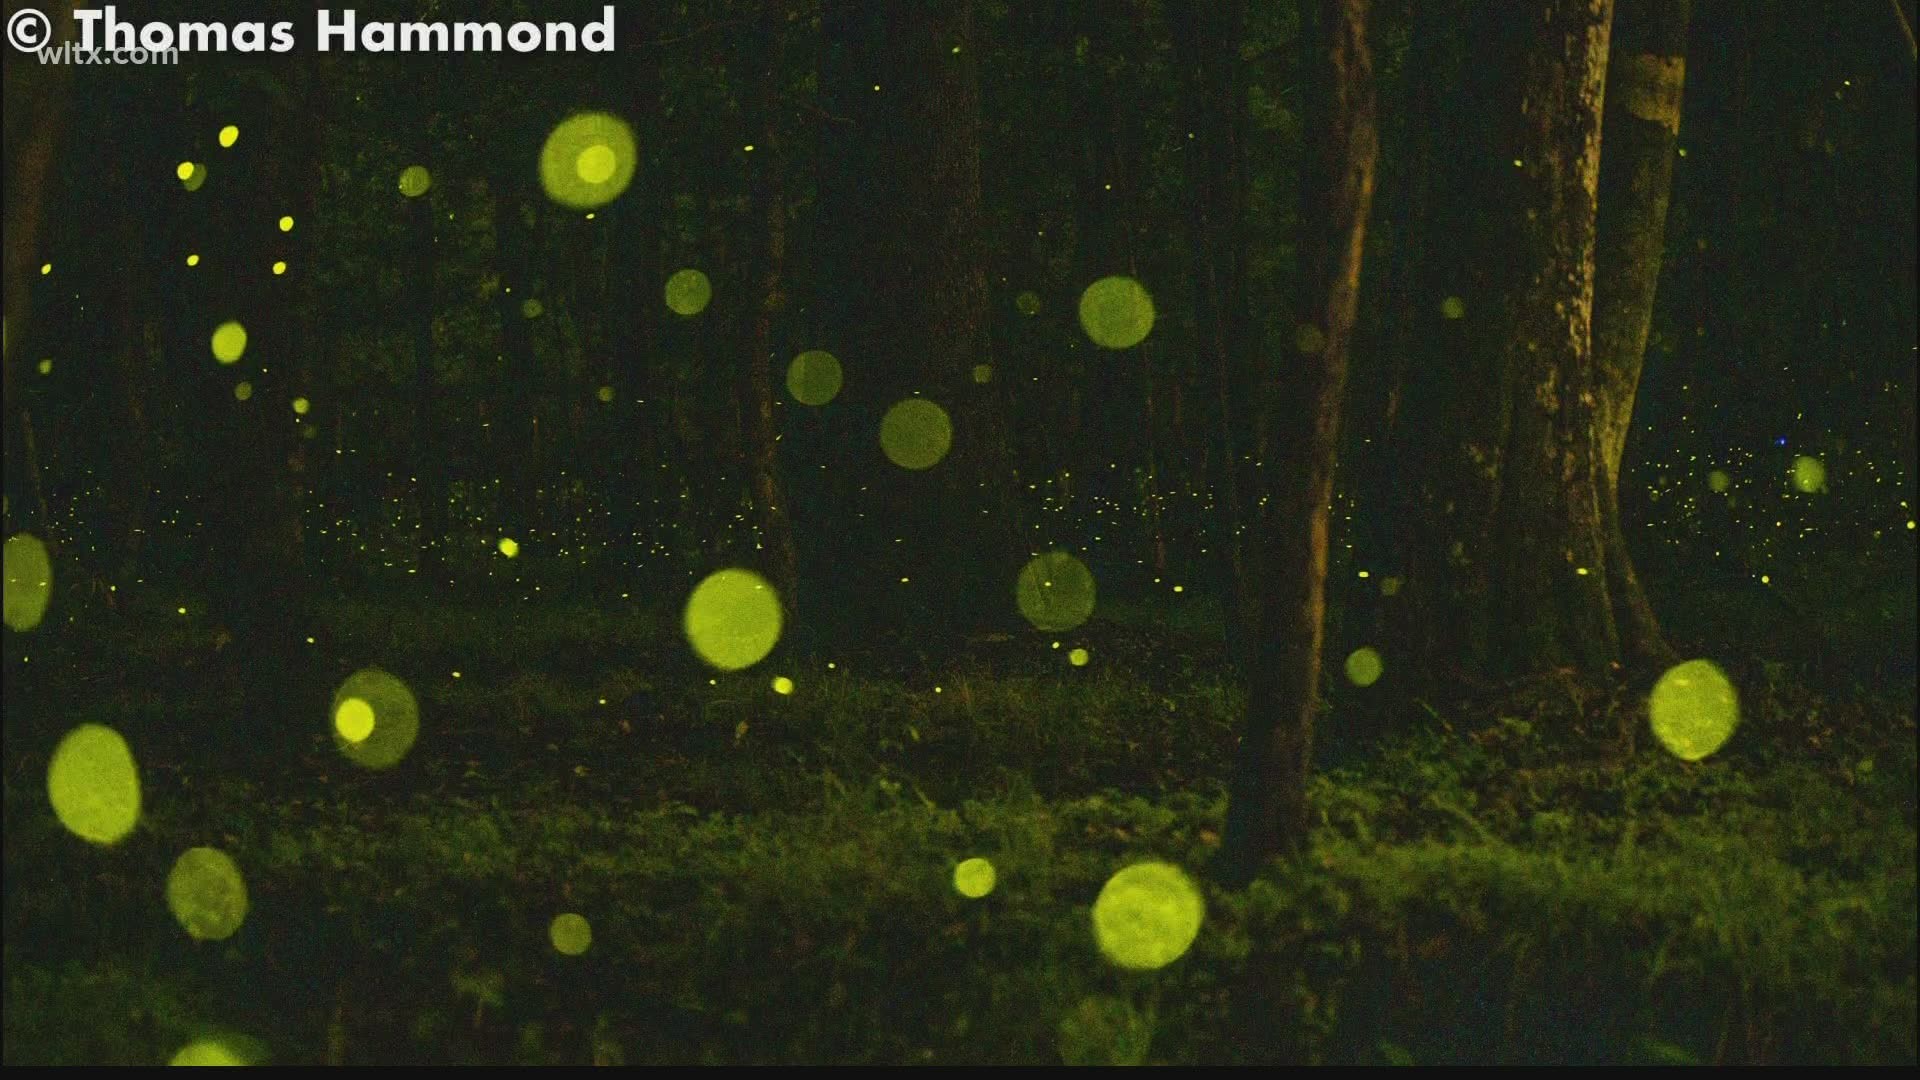 The Congaree National Park has created a lottery system for those wishing to view the fireflies in 2021.